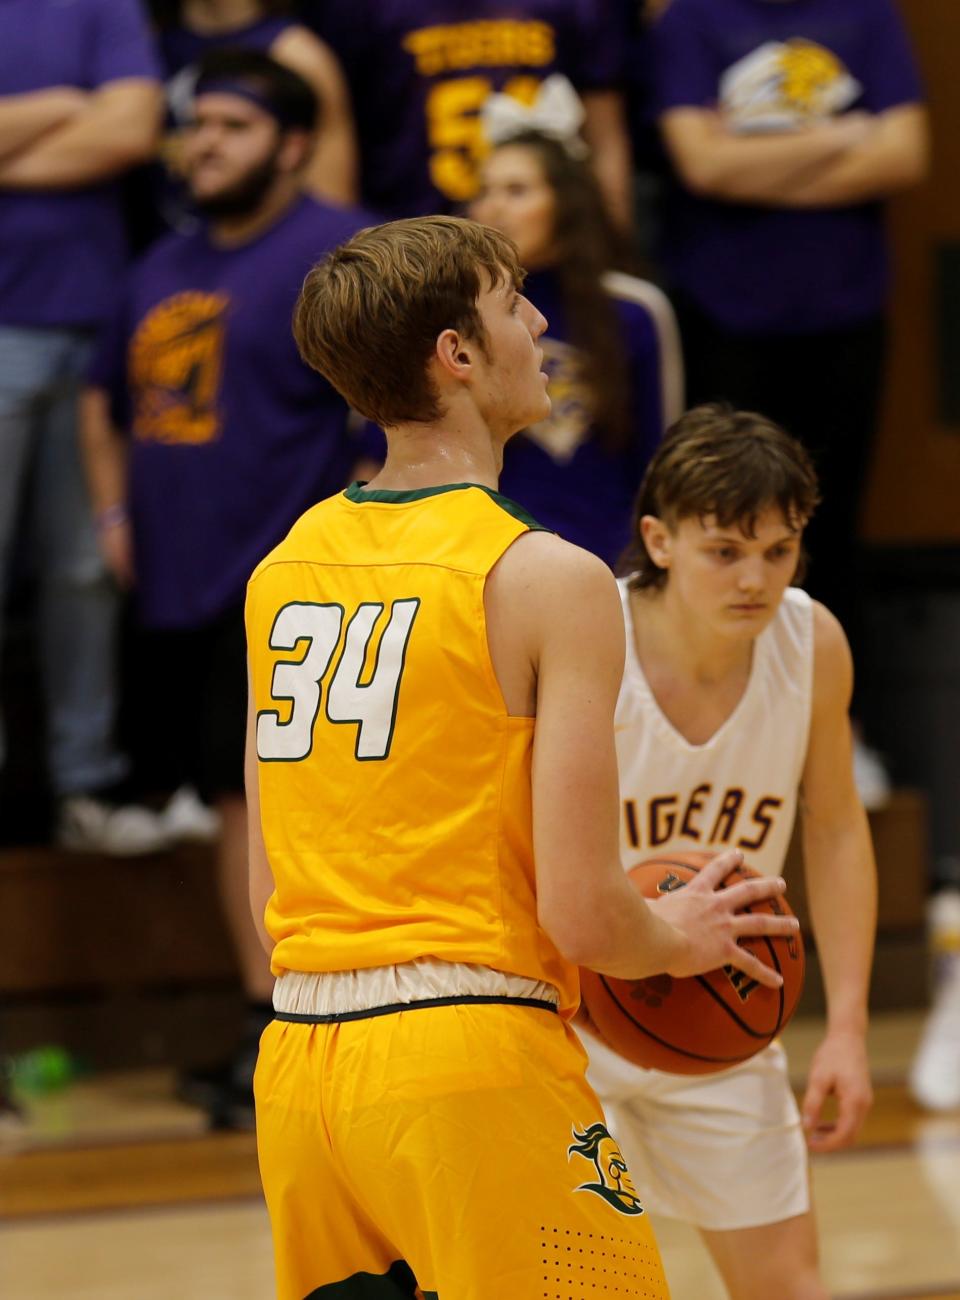 Northeastern senior Raedhyn Foust shoots a free throw while Hagerstown junior Mason Romack prepares to box out during the Wayne County Tournament championship Jan. 8, 2022.